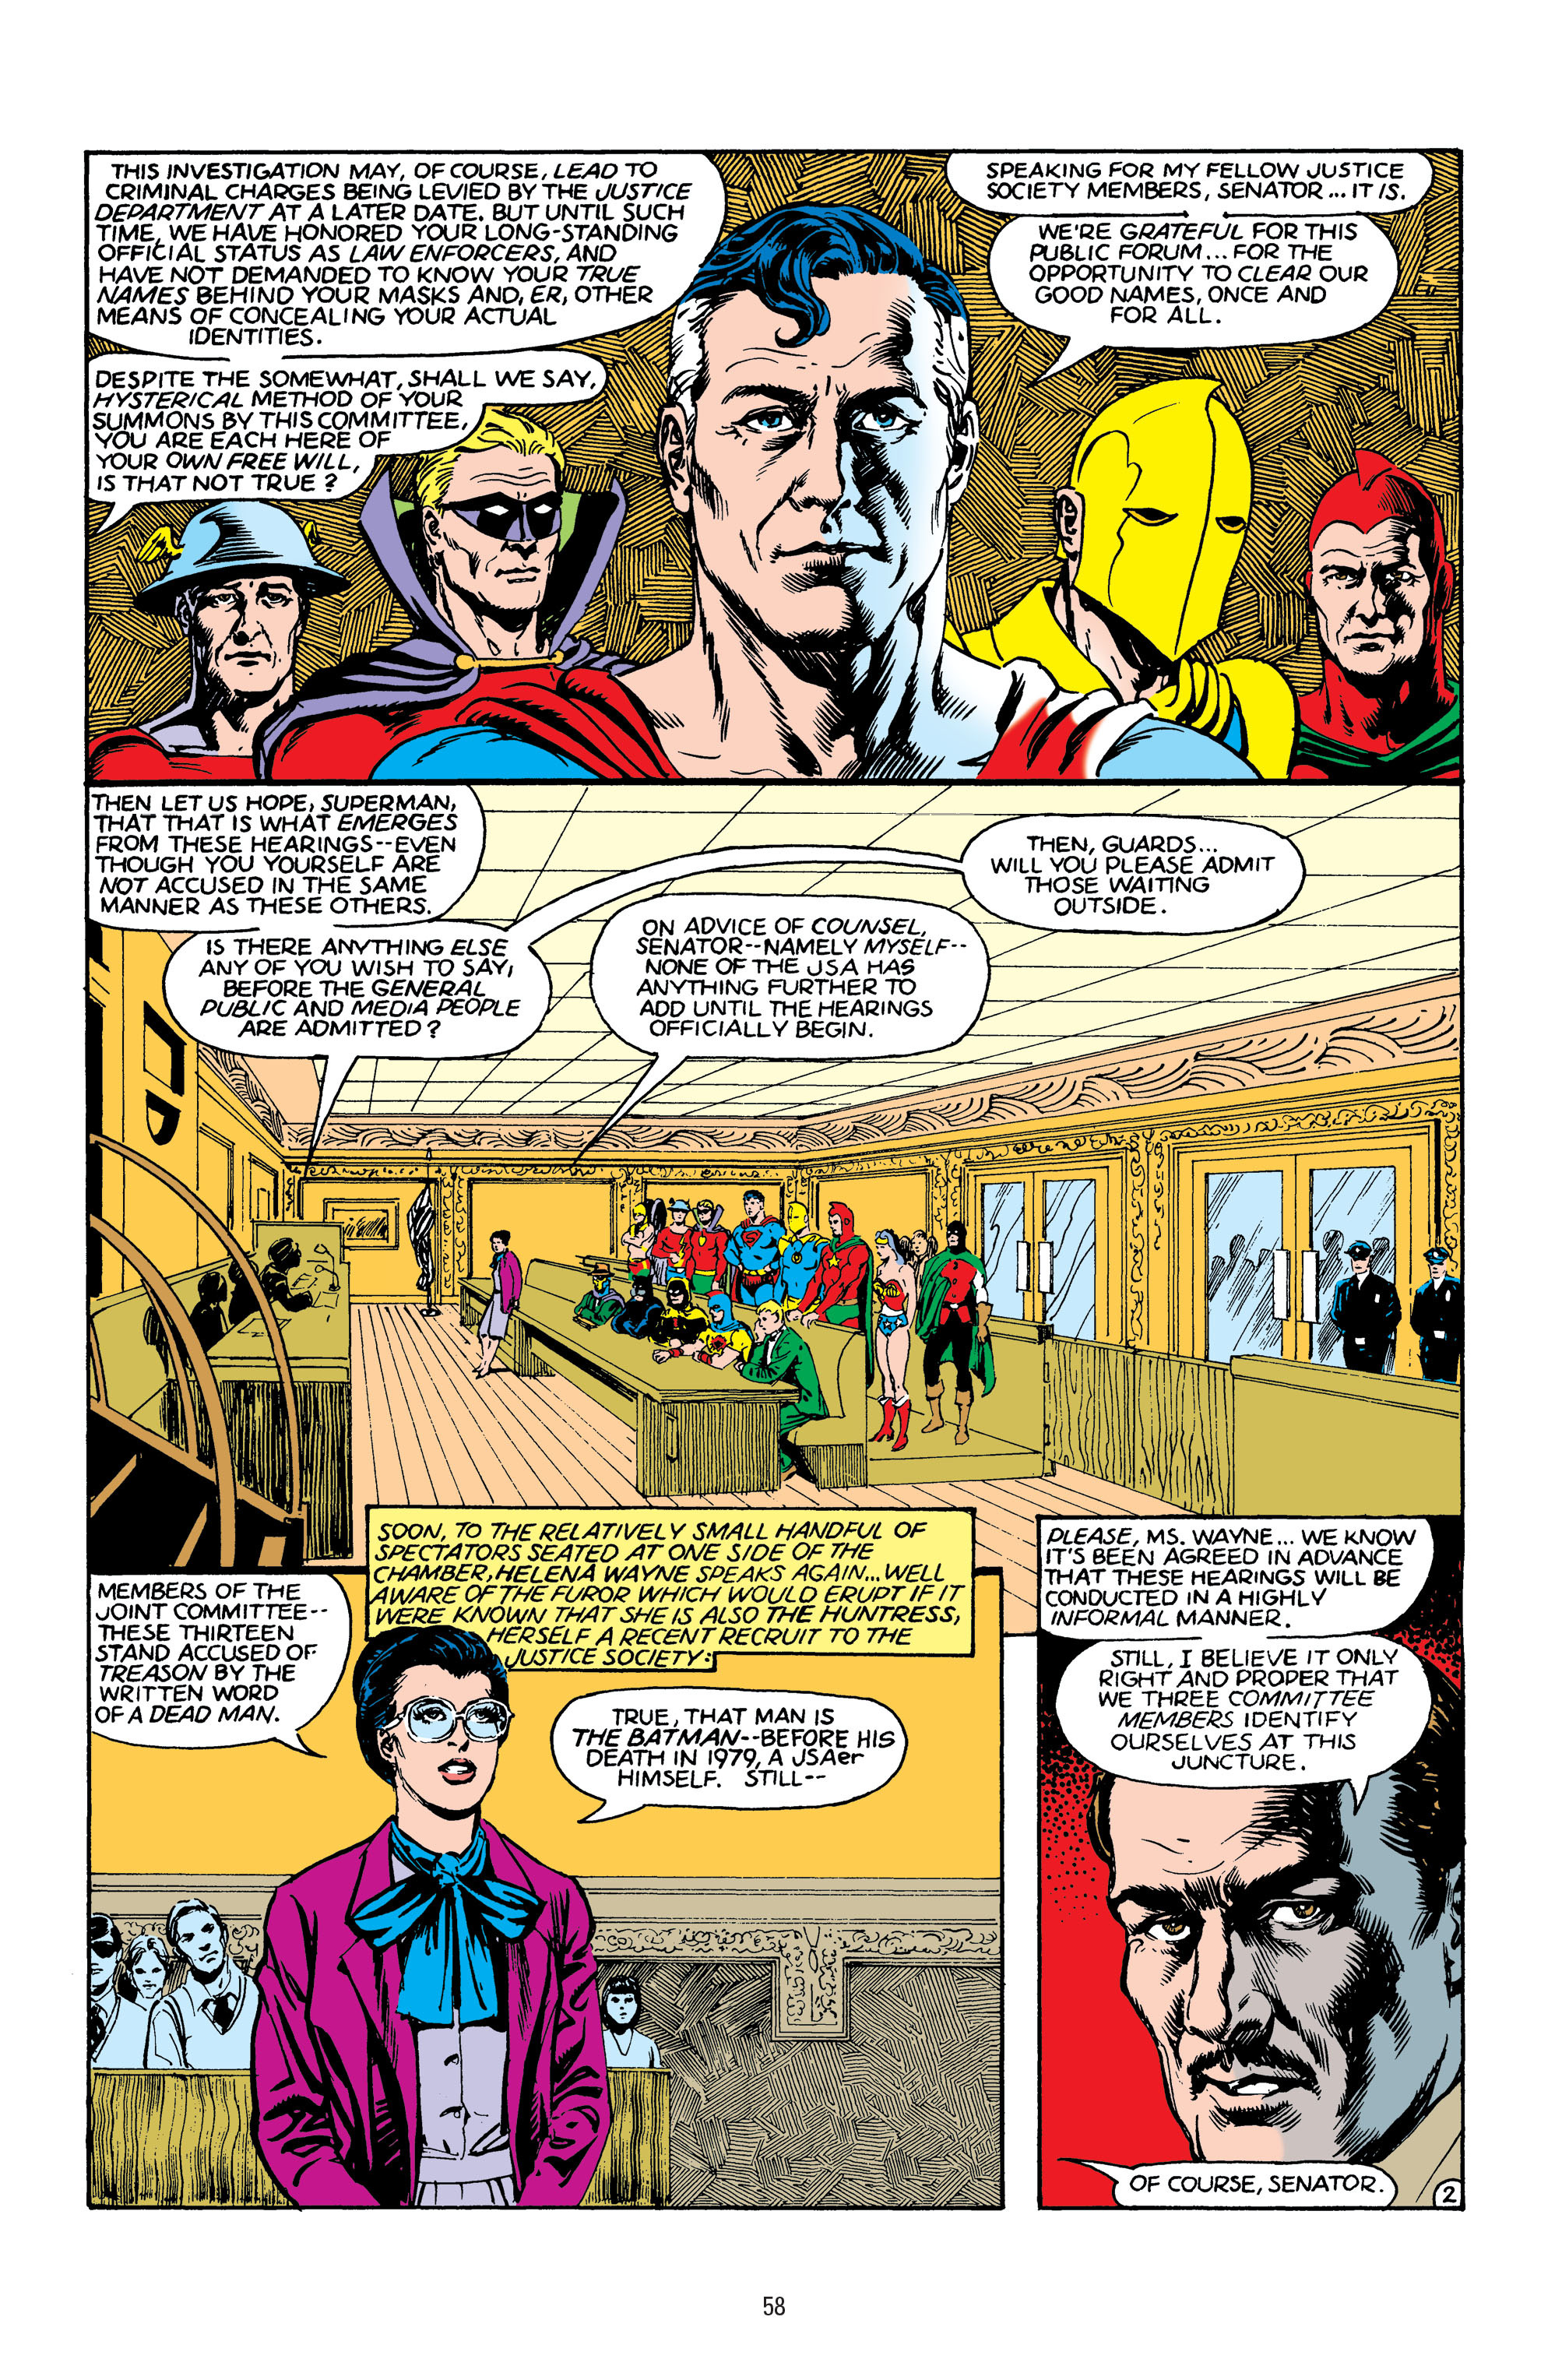 Read online America vs. the Justice Society comic -  Issue # TPB - 56